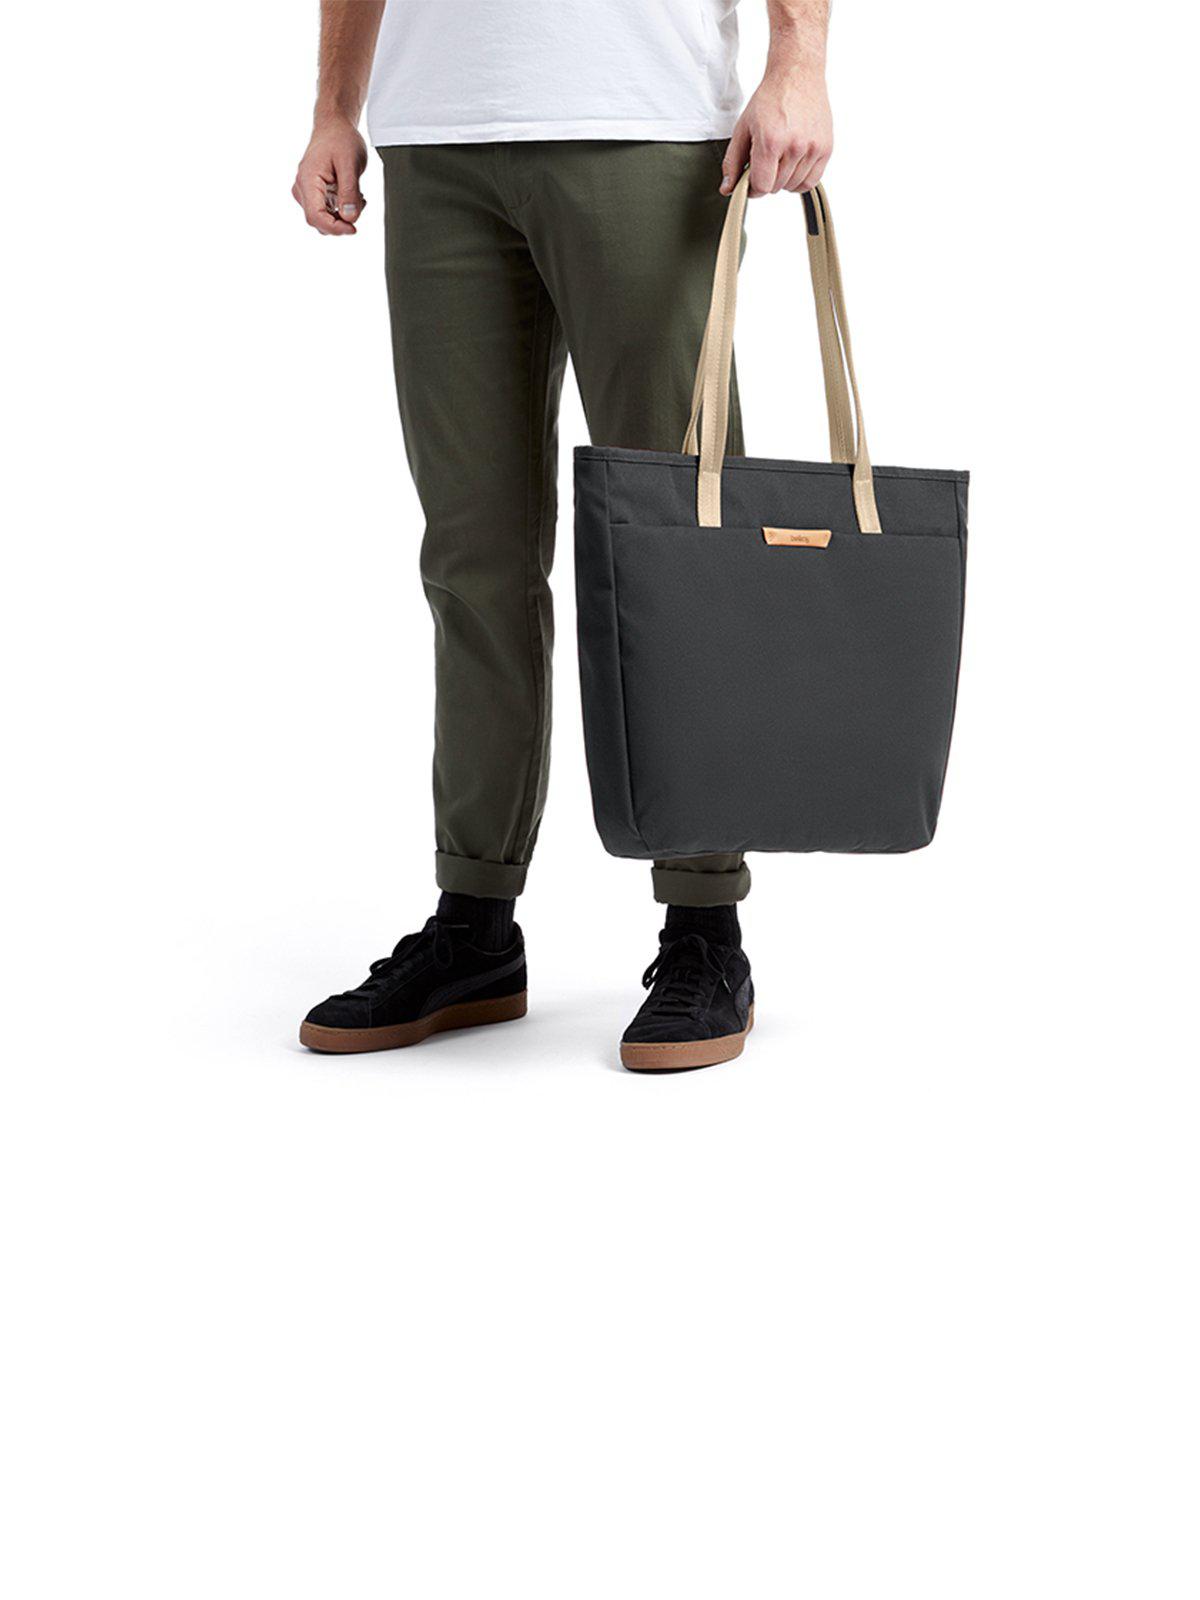 Bellroy Tokyo Tote Second Edition Bronze